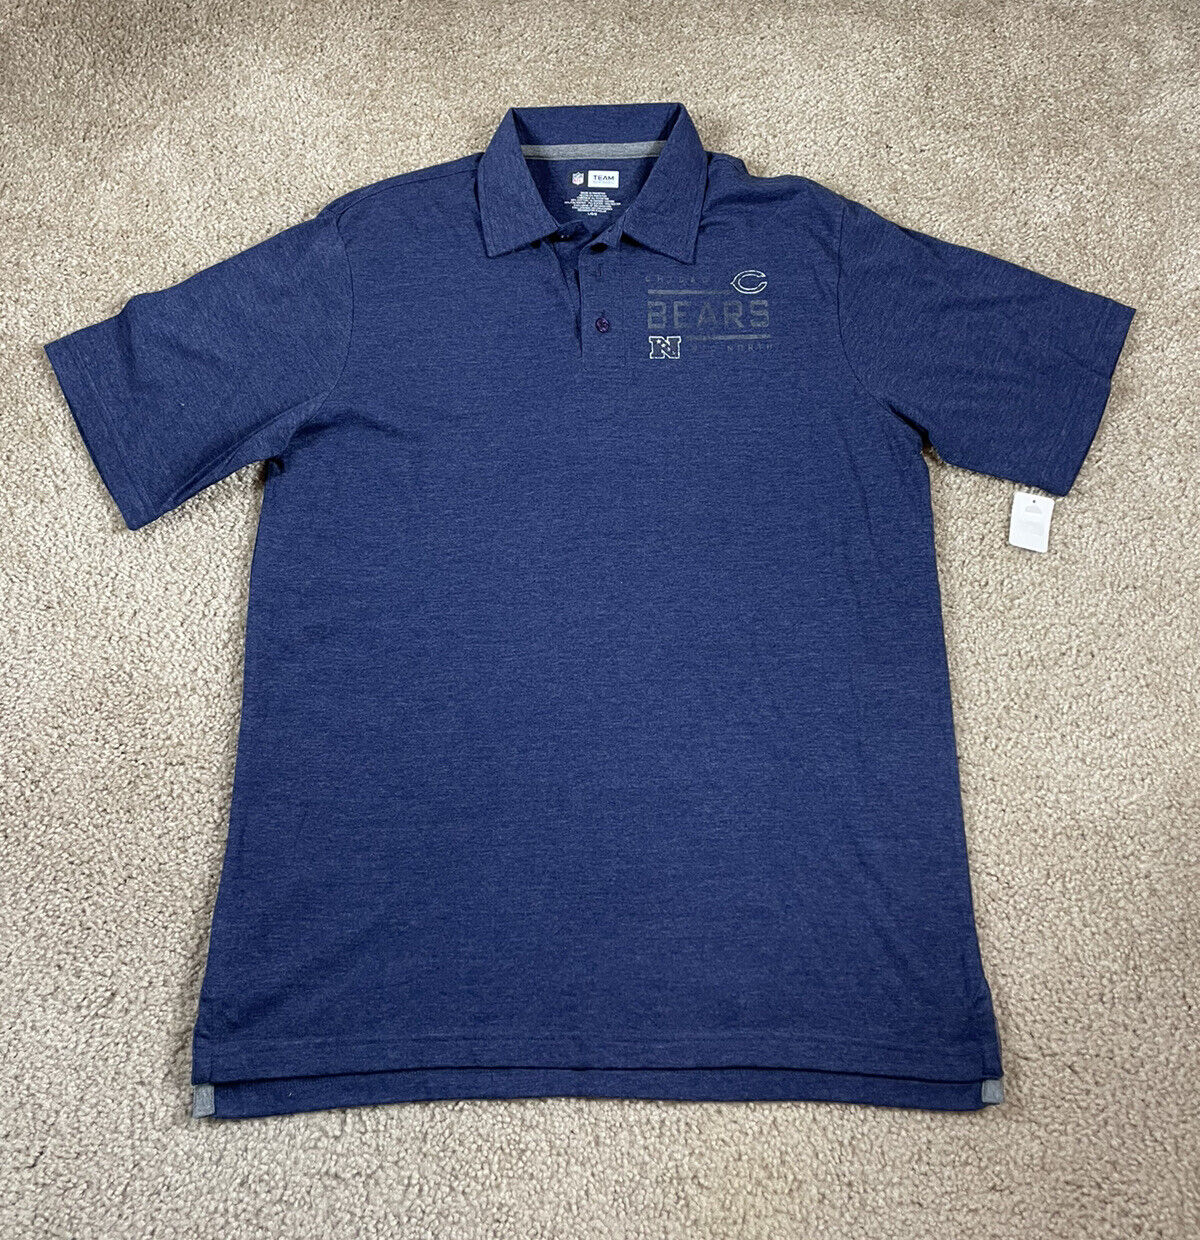 Chicago Bears Polo Shirt NFL Official Team Apparel Cotton Blue Men Large L NWT